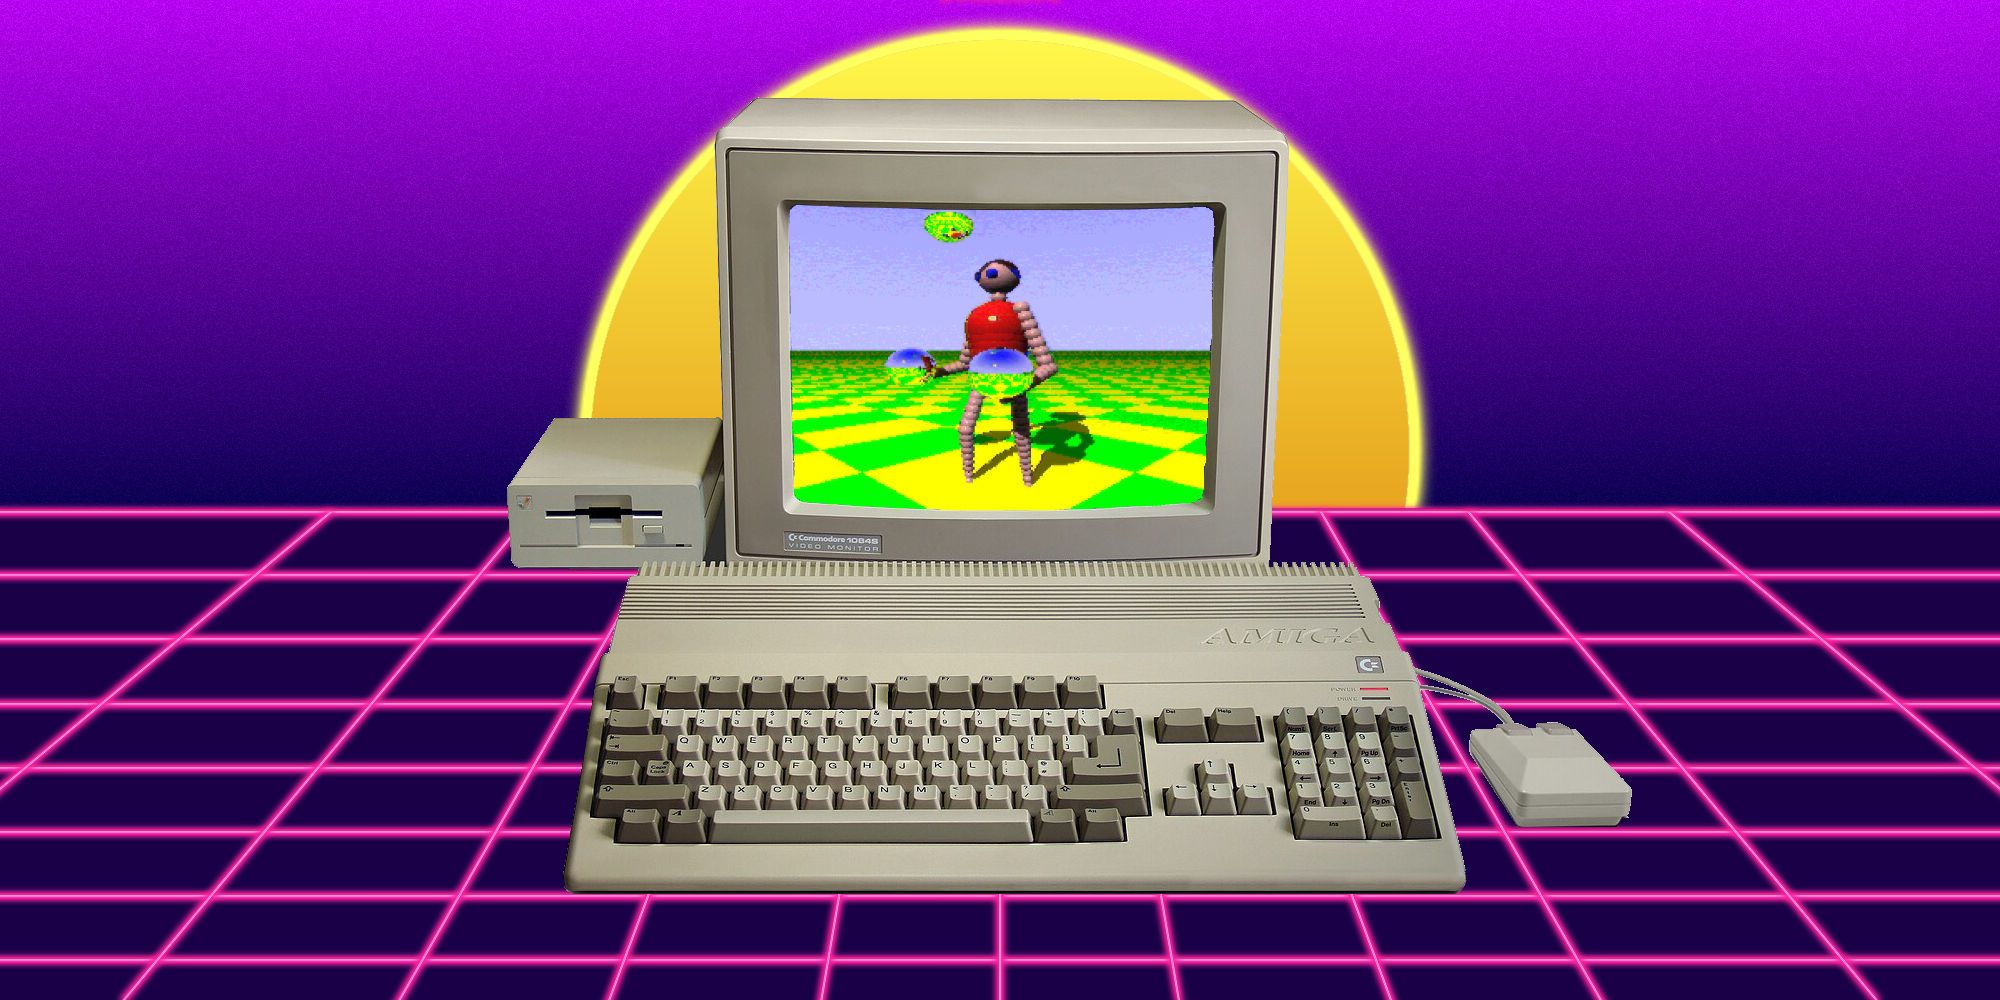 Classic computer, the Amiga 500, on a 90s neon inspired background